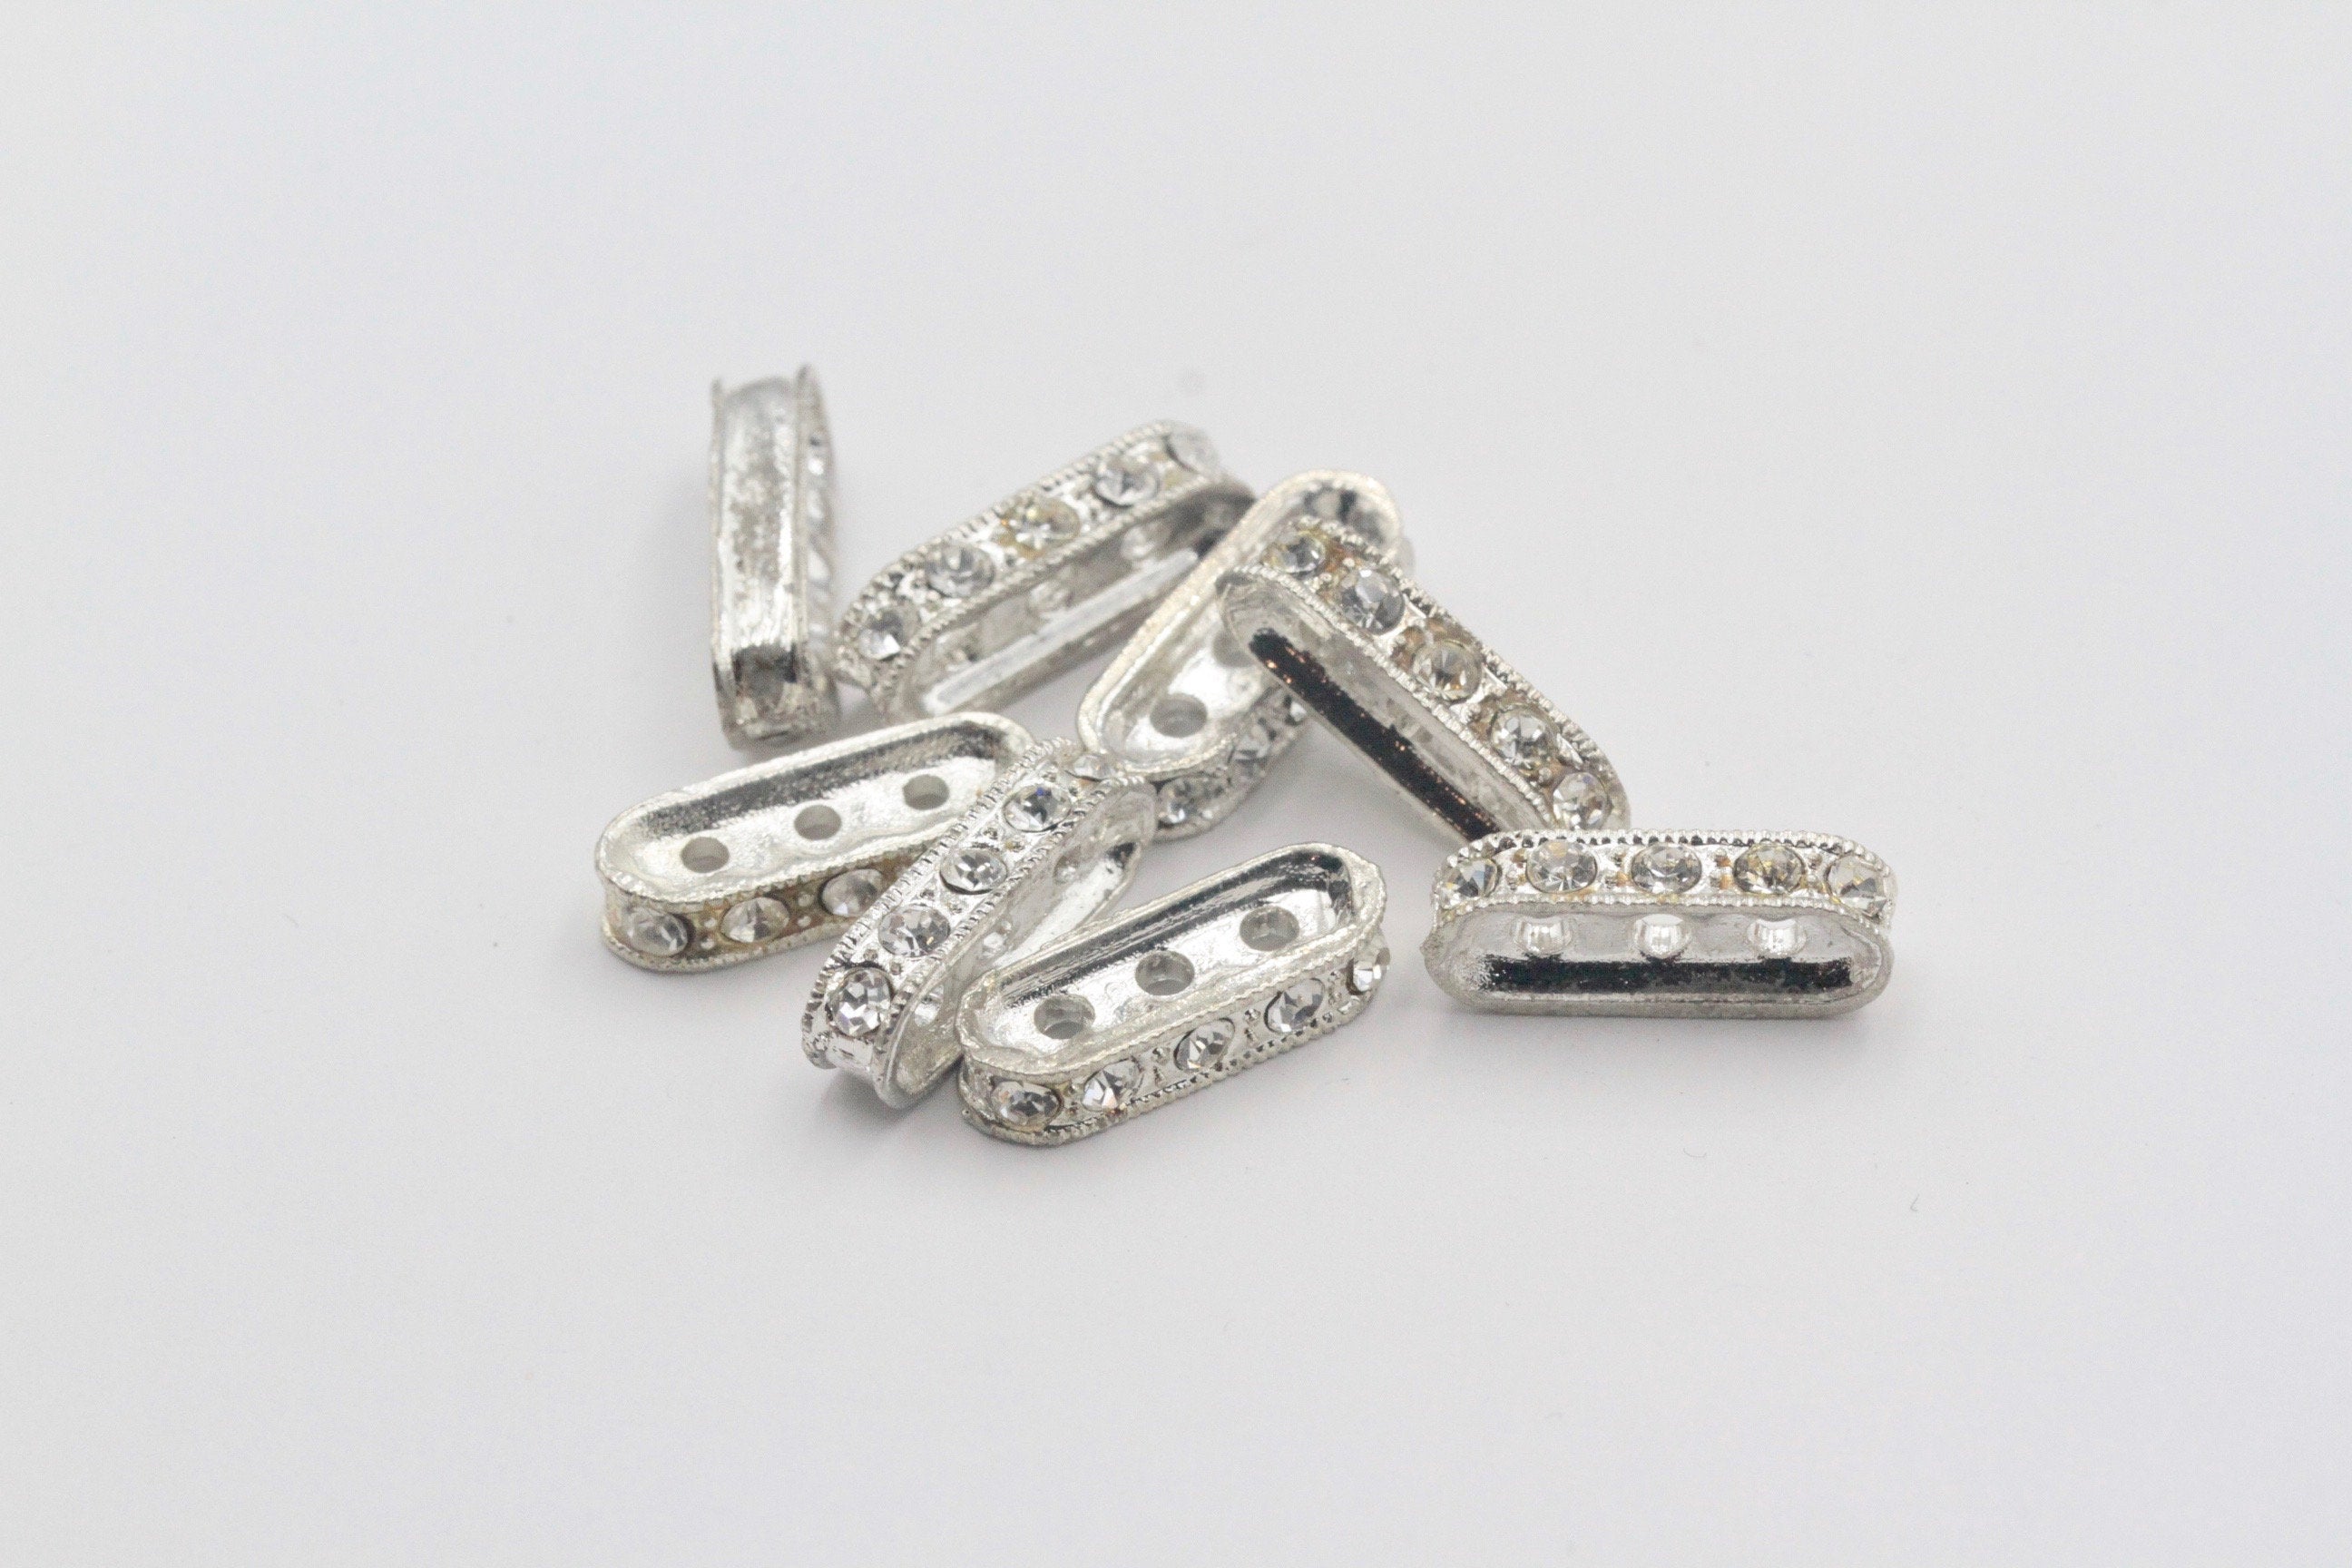 2pcs, Zinc Based Alloy 3 hole link connector with Rhinestones in silver